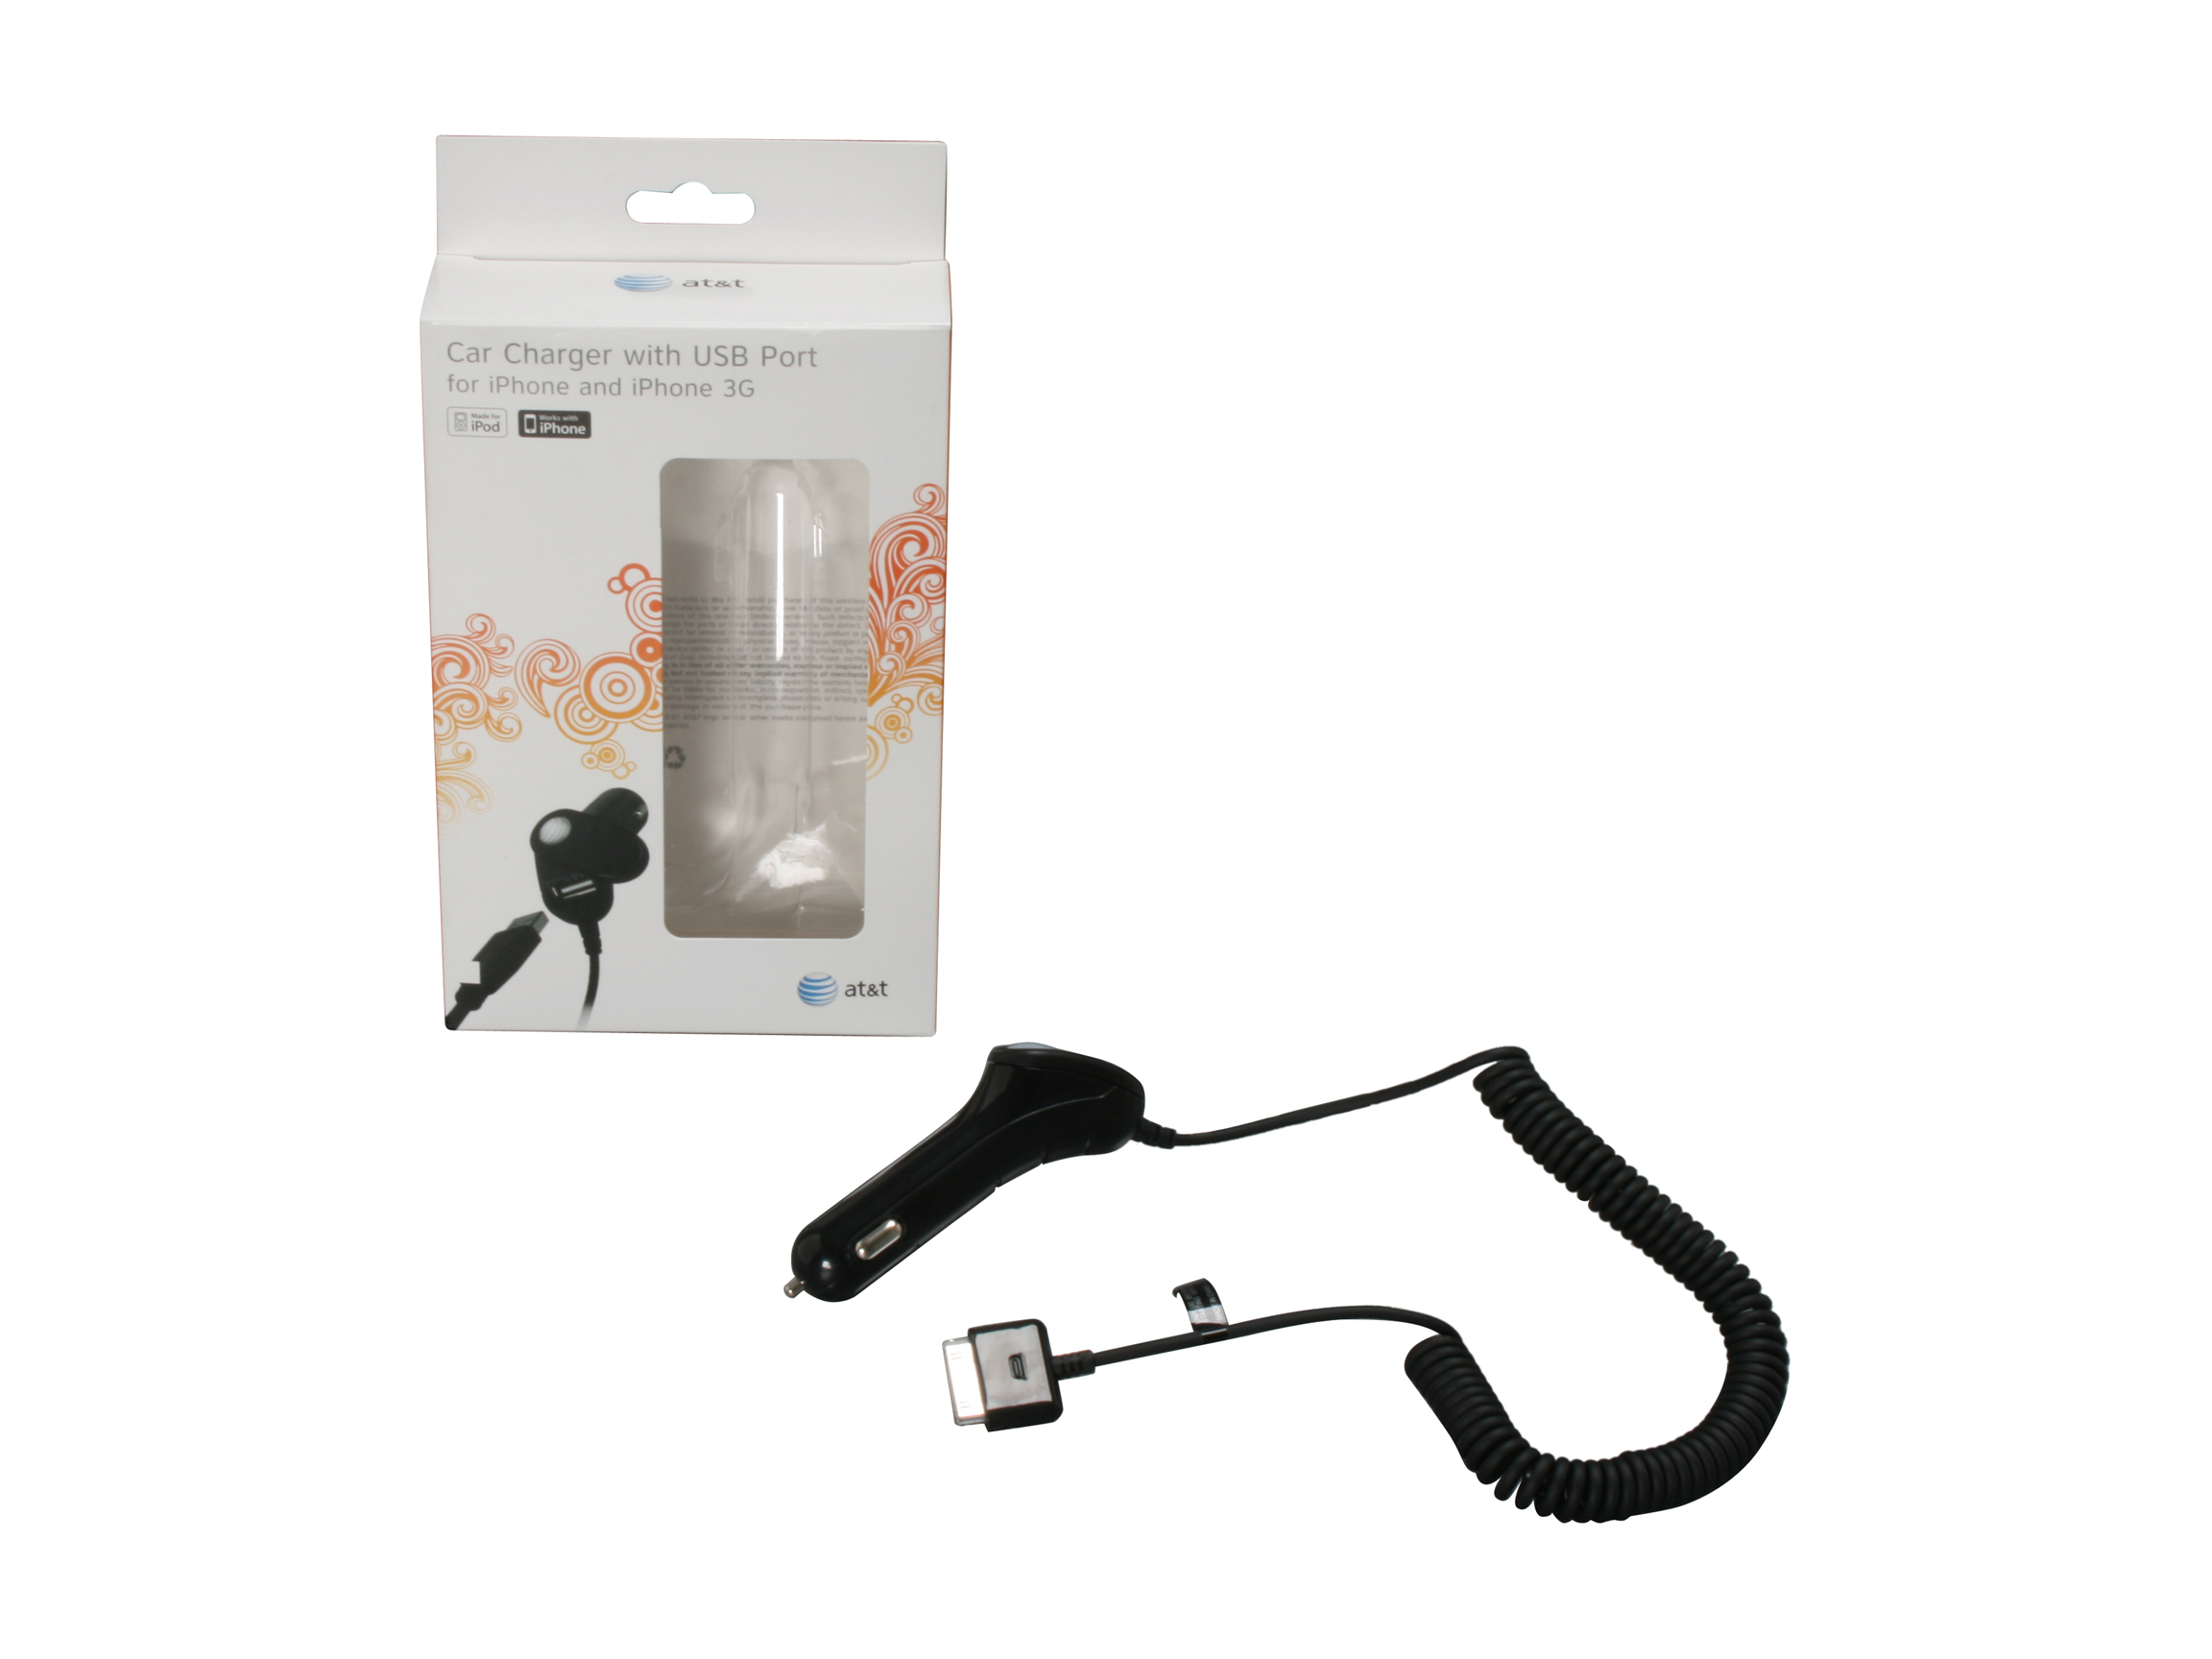 AT&T Black Car Charger with USB Port For iPhone (32520att)